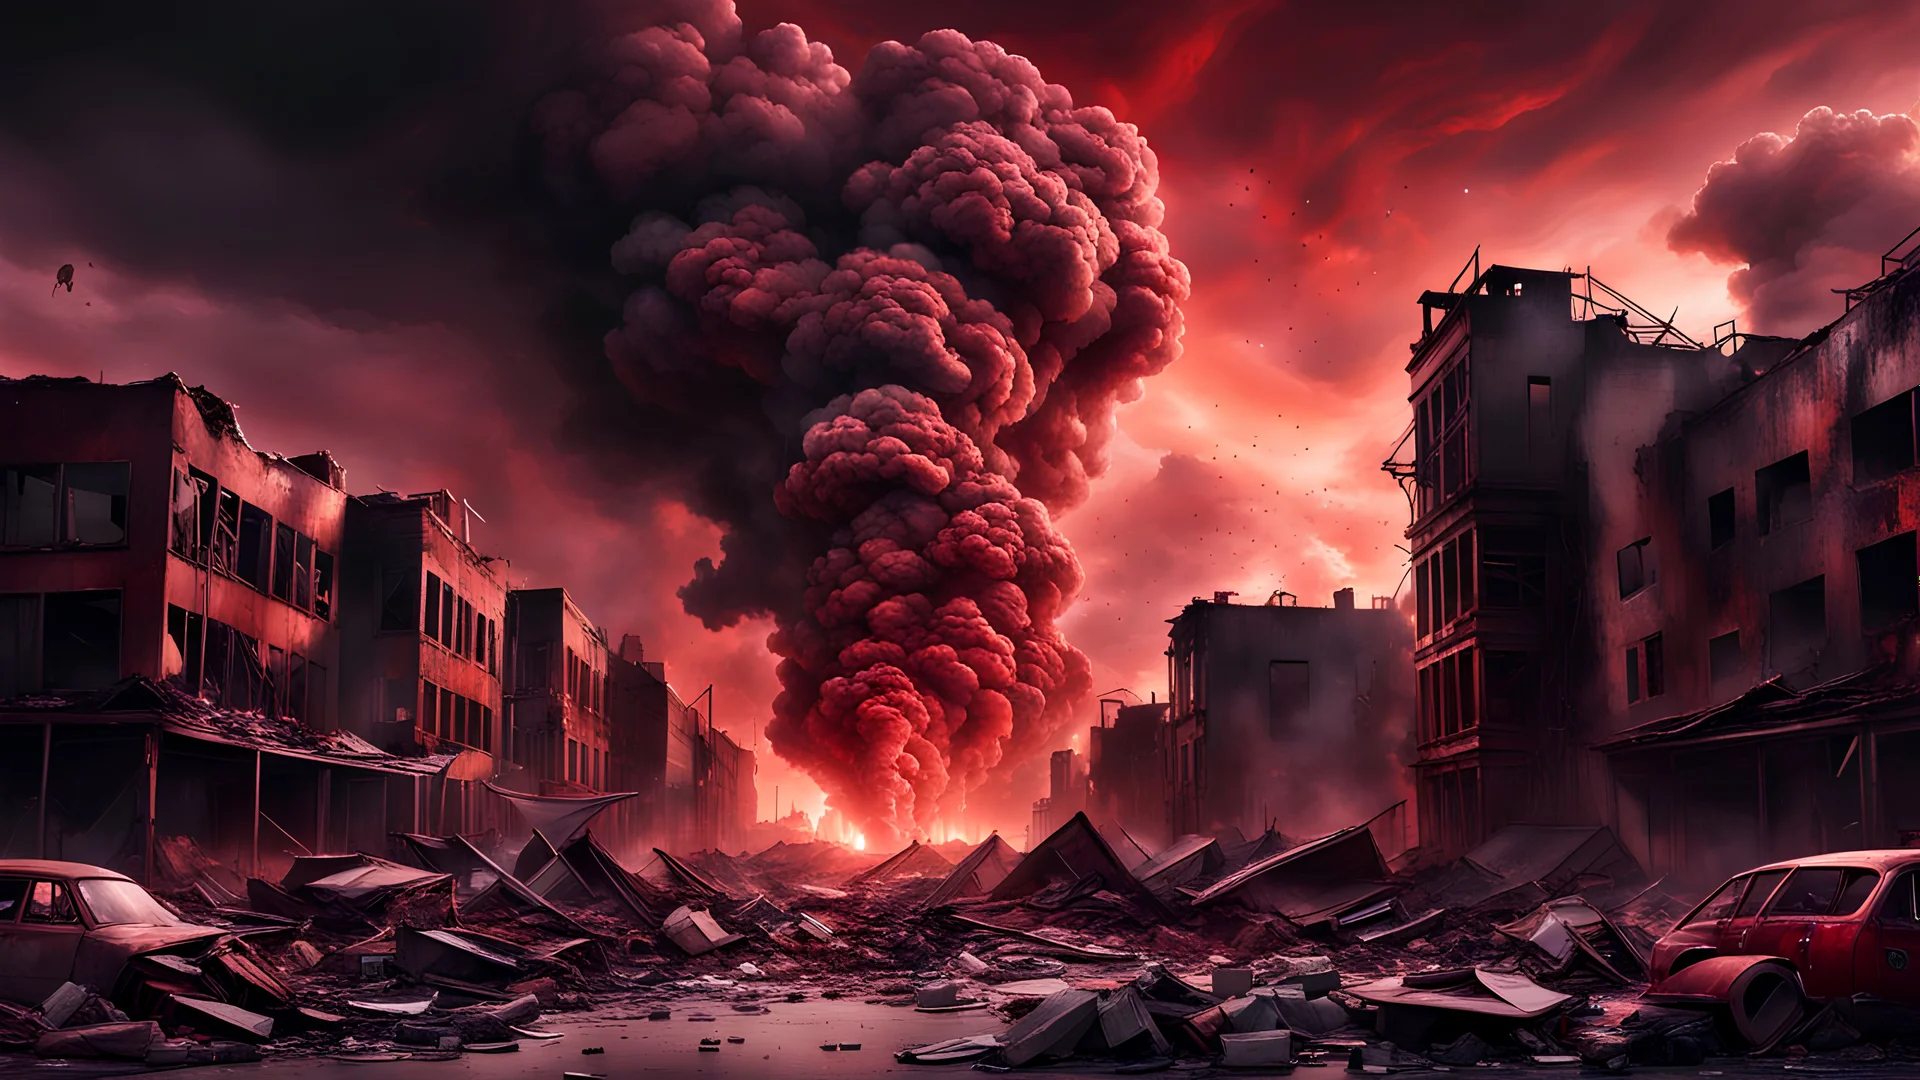 Hyper Realistic Apocalyptic Doomsday with Red & Maroon Sky with smoke, ashes, embers & destroyed buildings showing dramatic & cinematic ambiance.